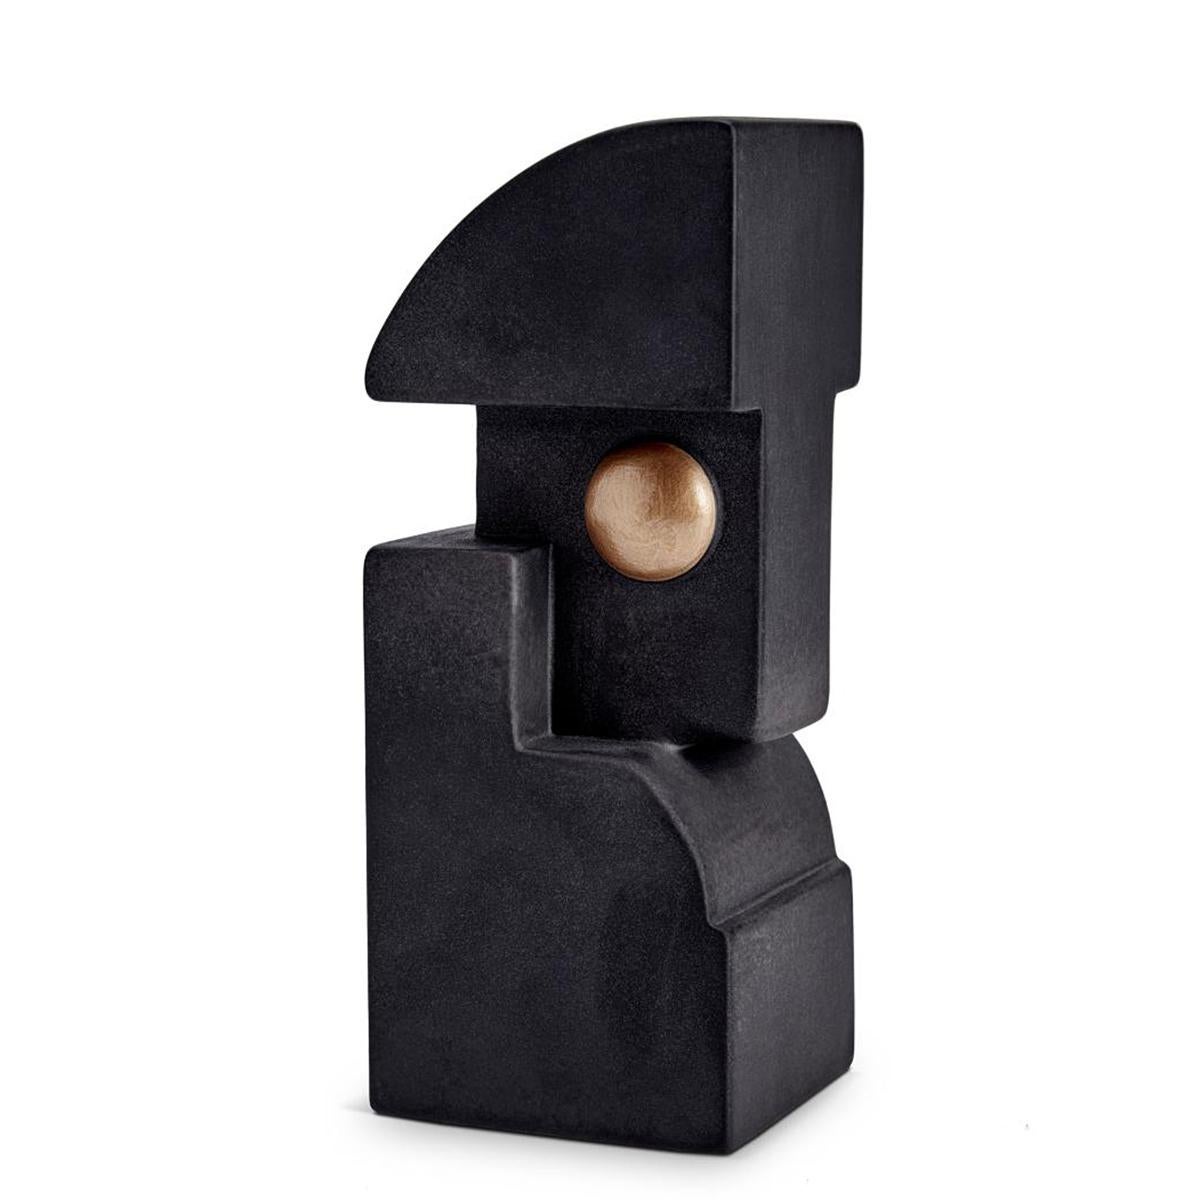 Bookend Pâcques Set of 2 in earthenware,
presented in a subtle and luxury gift box.